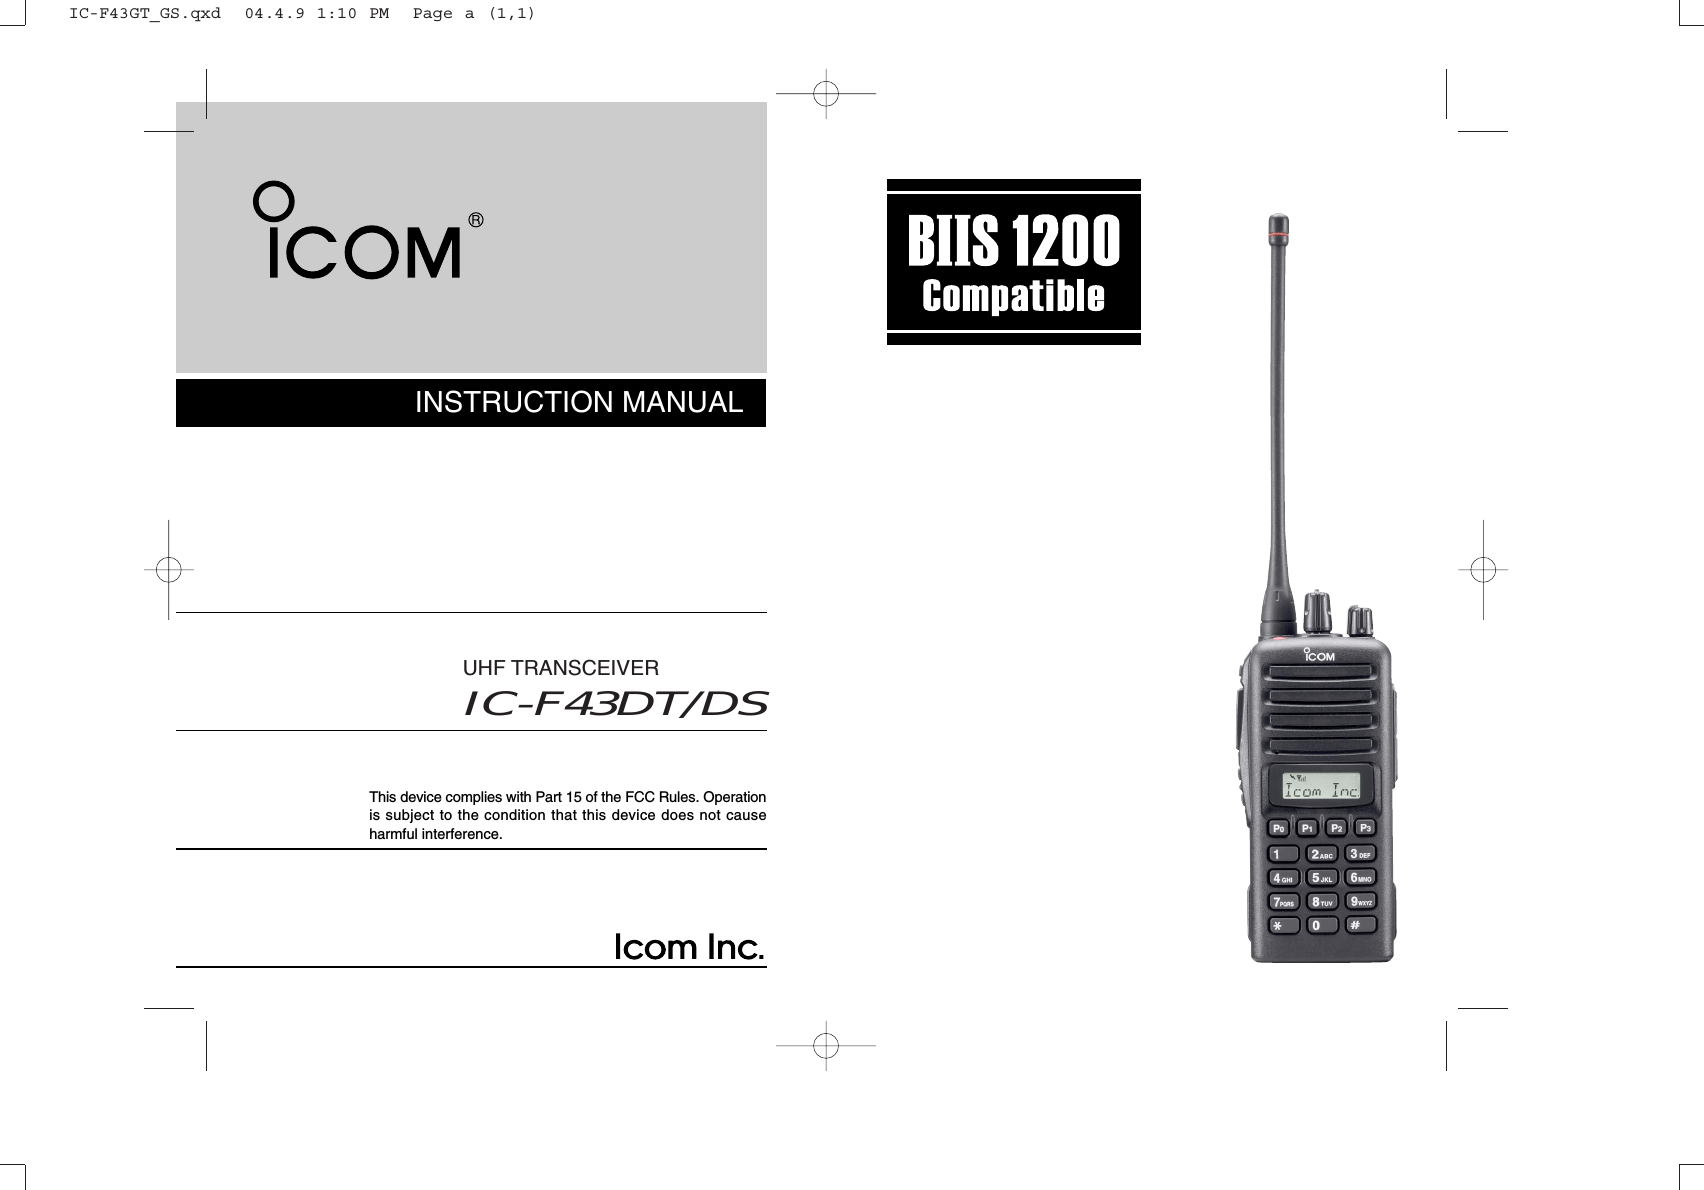 INSTRUCTION MANUALThis device complies with Part 15 of the FCC Rules. Operationis subject to the condition that this device does not causeharmful interference.IC-F43DT/DSUHF TRANSCEIVERIC-F43GT_GS.qxd  04.4.9 1:10 PM  Page a (1,1)